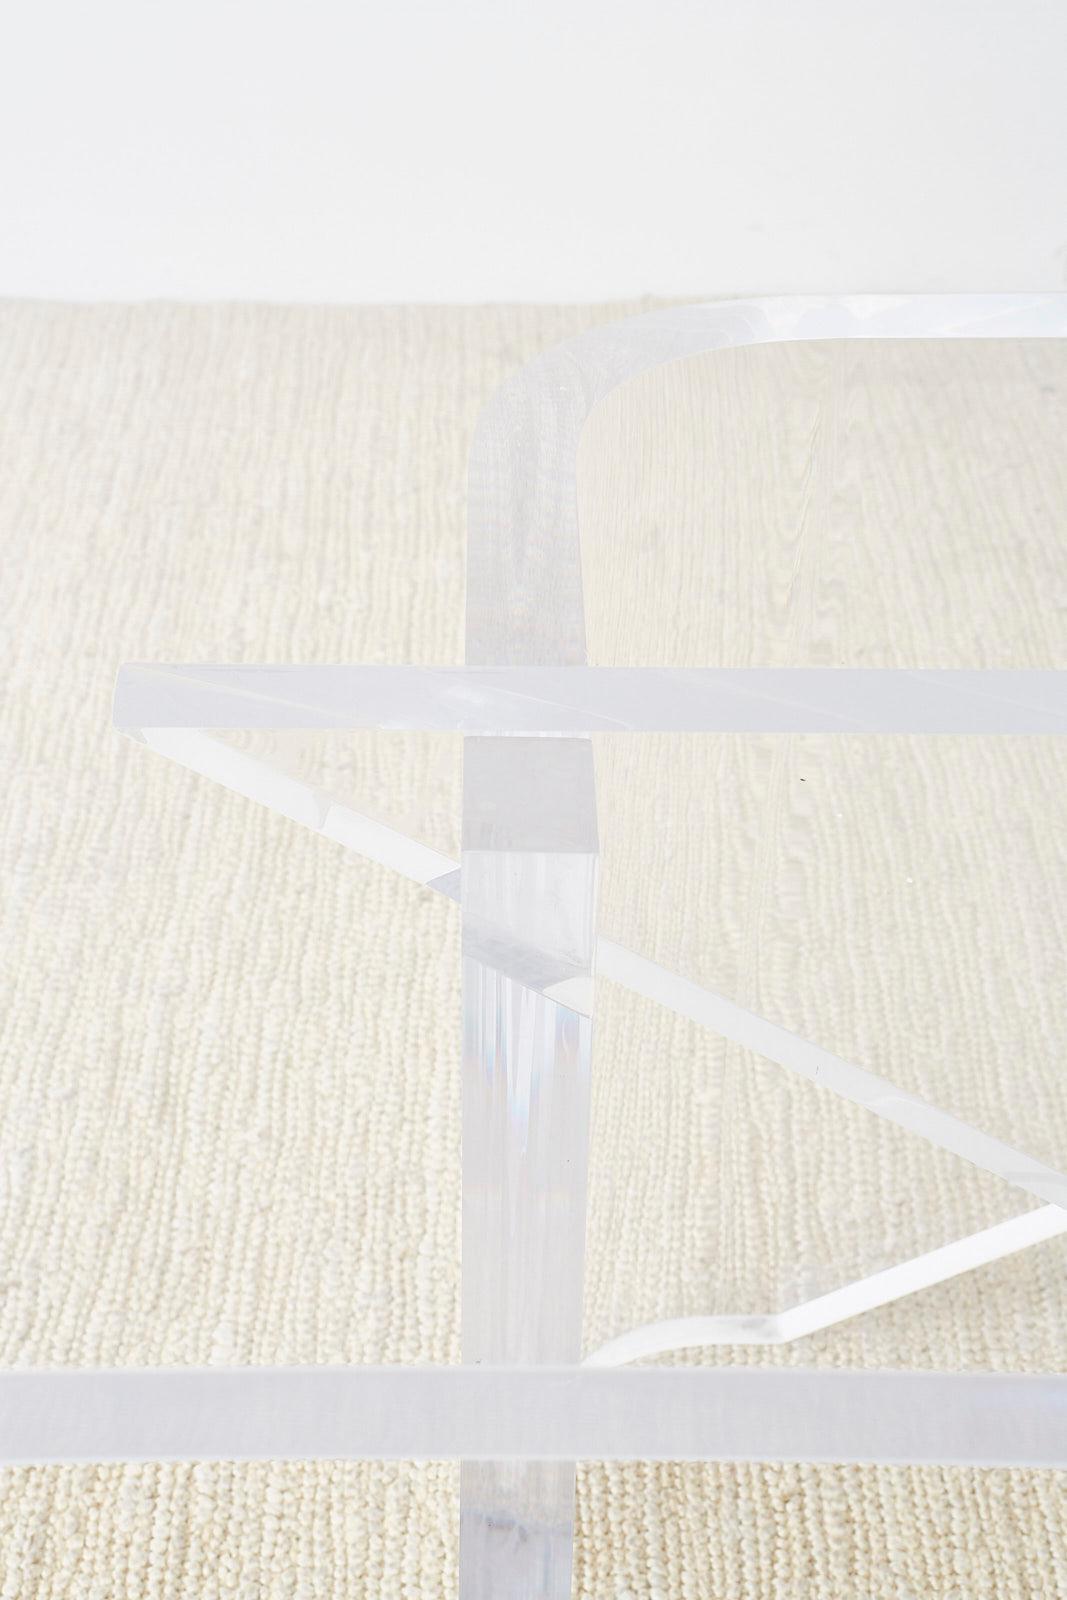 Acrylic Monumental Italian Moderne Sculptural Lucite Dining Table